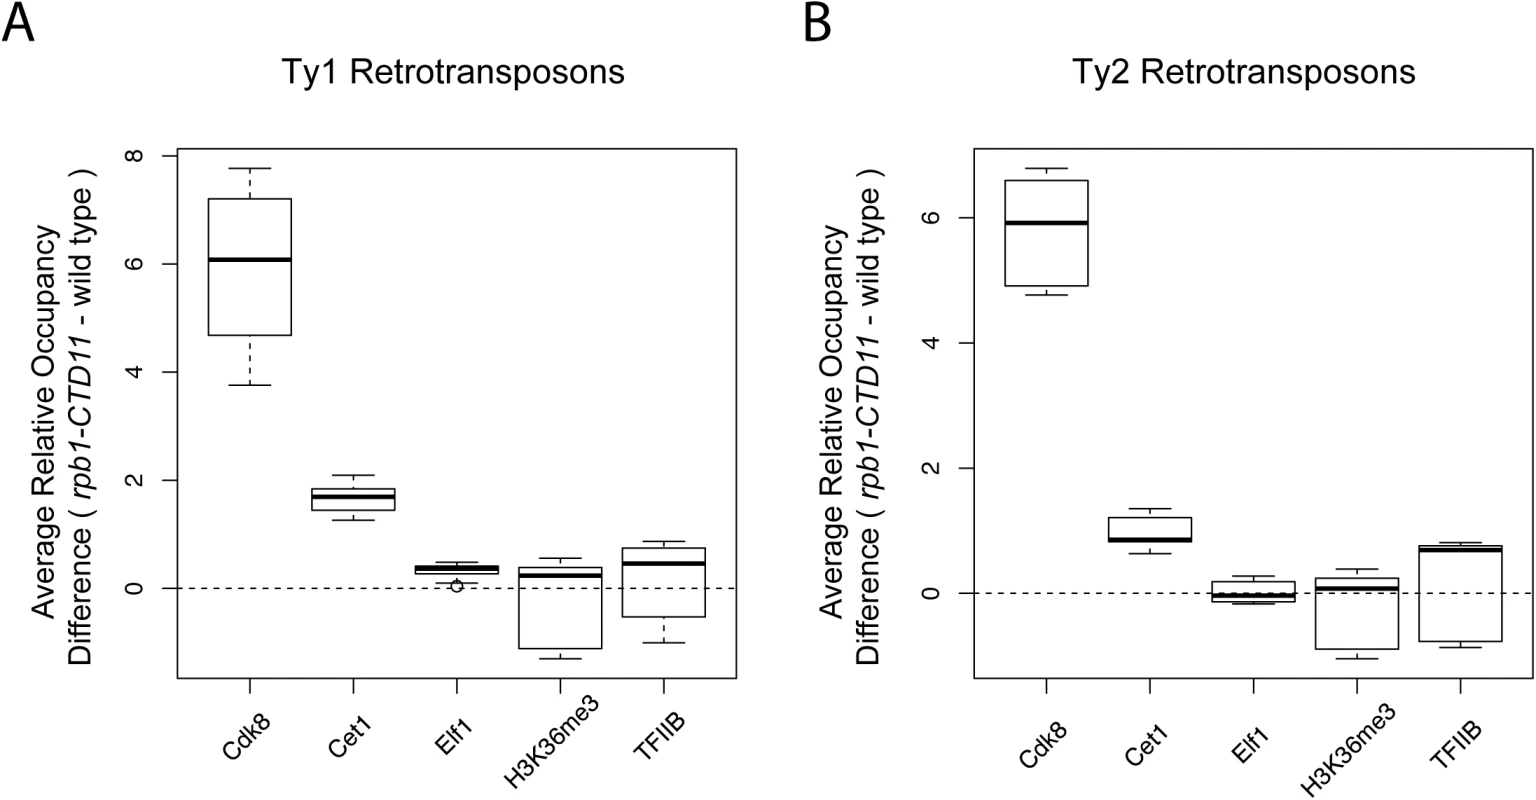 Truncation of the RNAPII-CTD resulted in altered association of a subset of transcription related factors at retrotransposons.